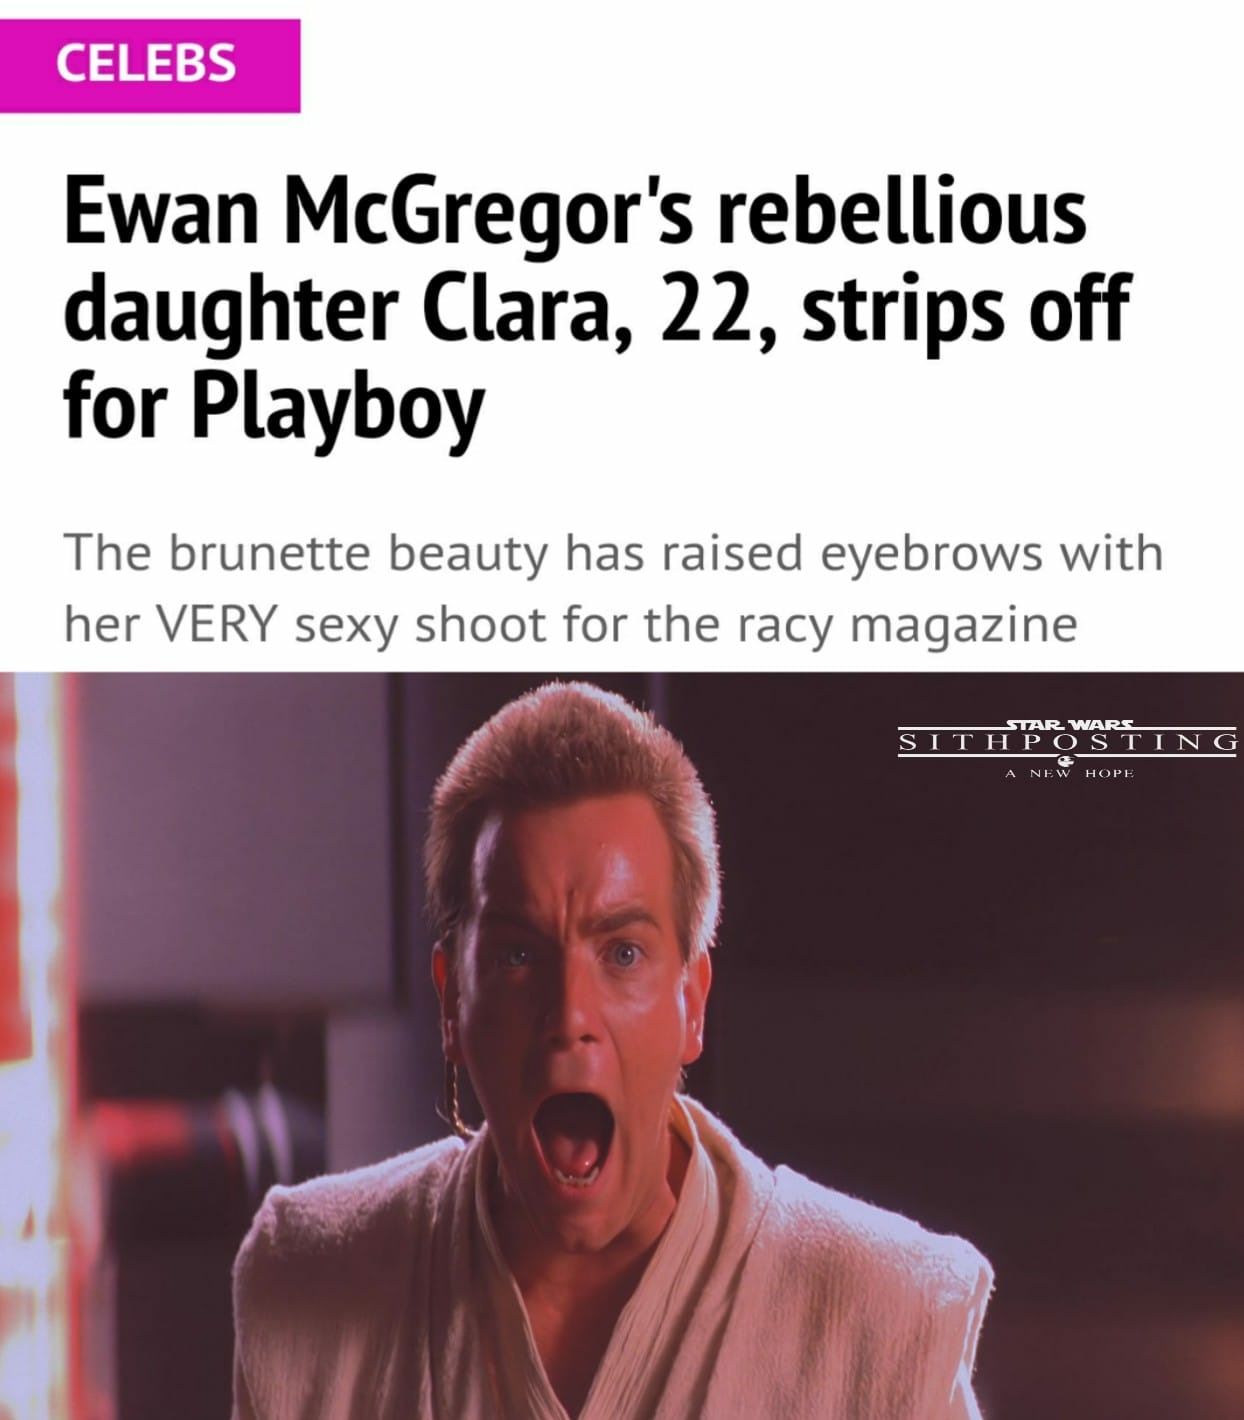 obi wan noooo - Celebs Ewan McGregor's rebellious daughter Clara, 22, strips off for Playboy The brunette beauty has raised eyebrows with her Very sexy shoot for the racy magazine Star Wars Si T H Posting A New Hope